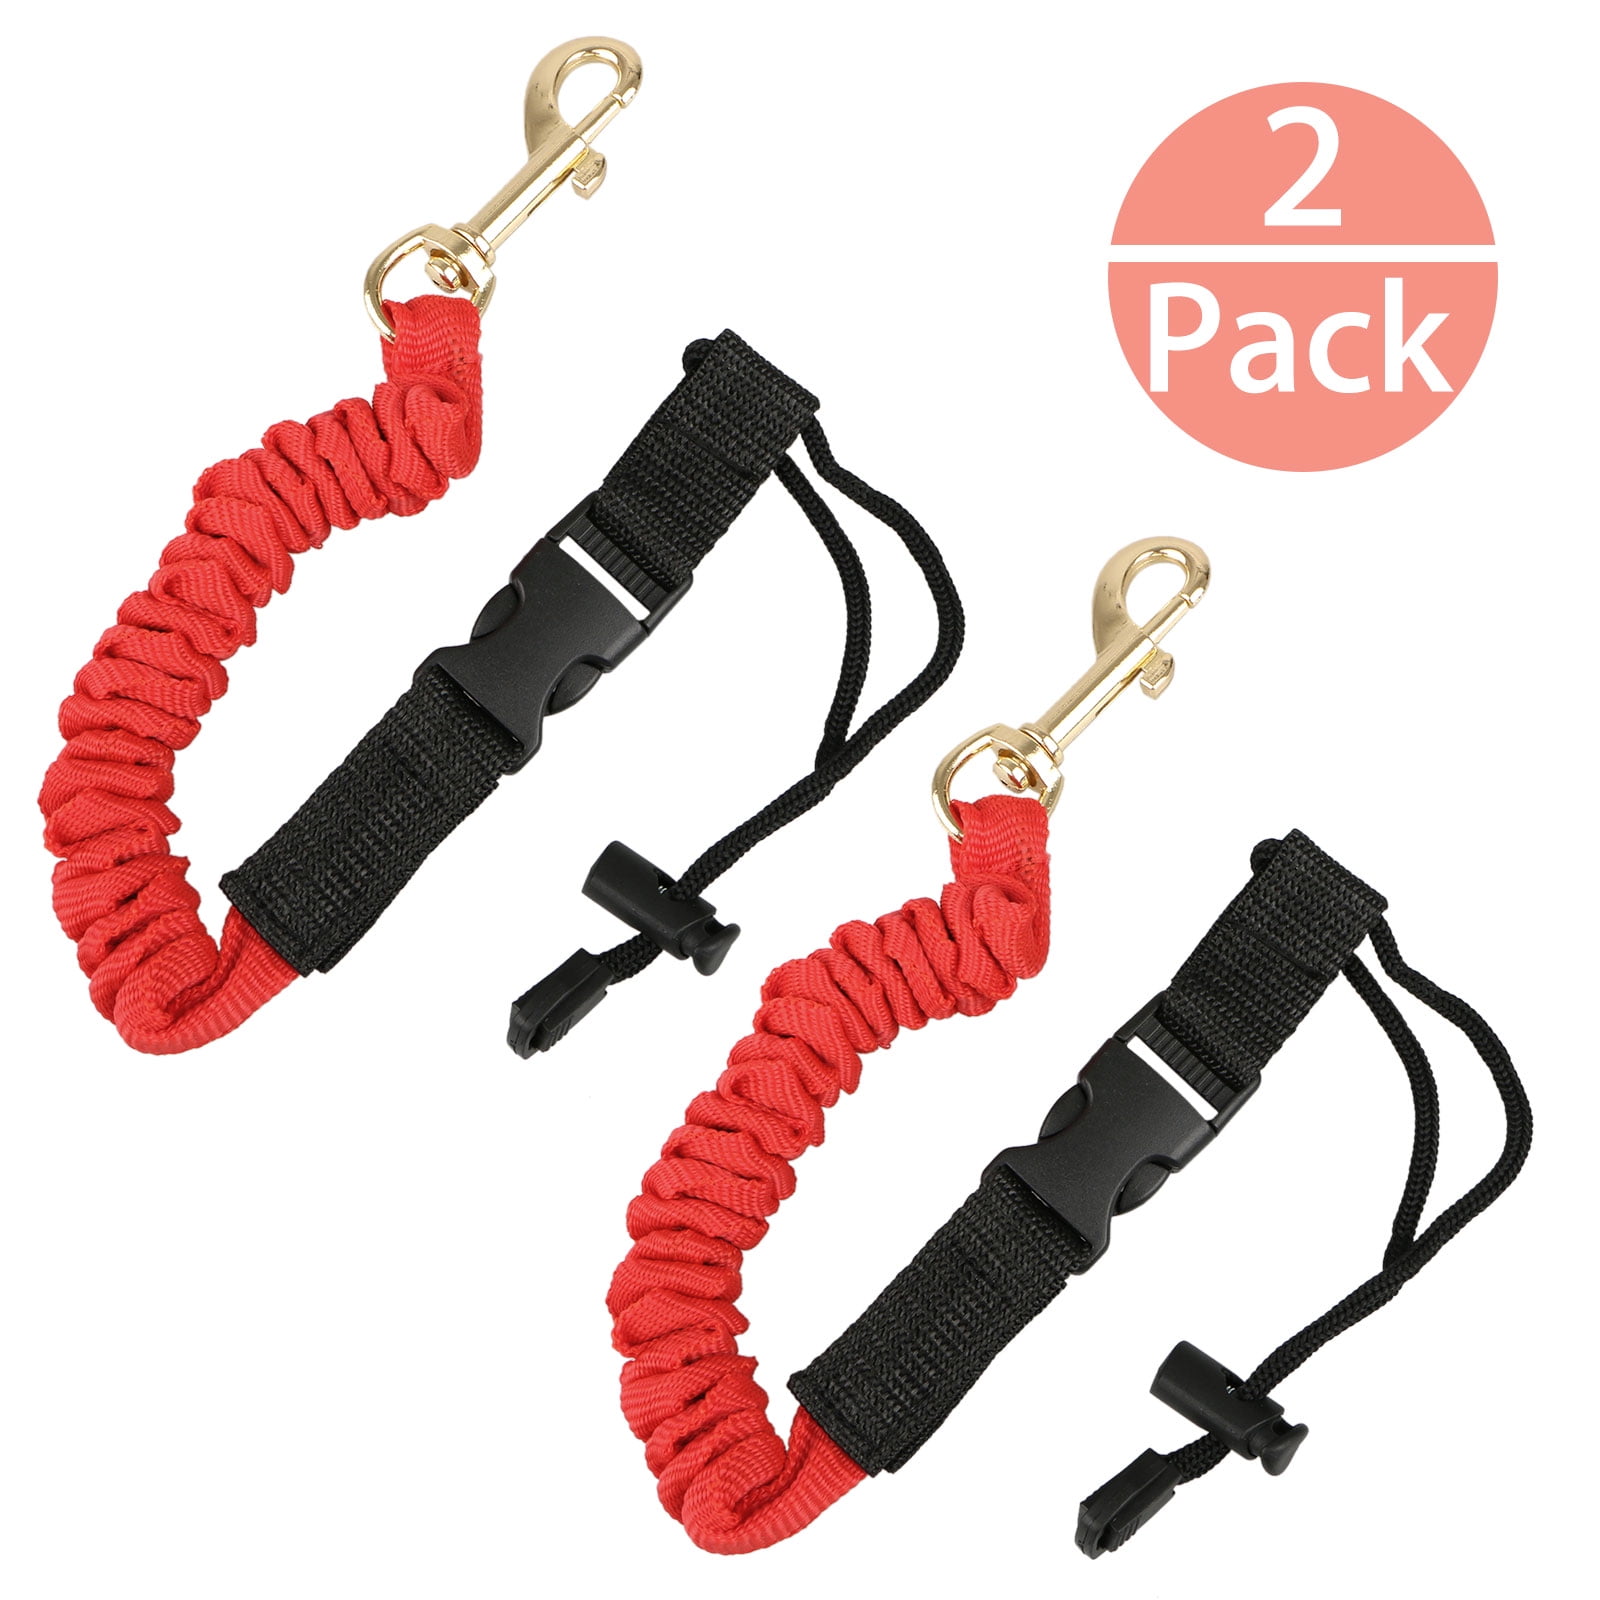 Details about   Safety Coiled Paddle Leash Fishing Rod Safety Cord Tether Hook Kayak Canoe Boat 